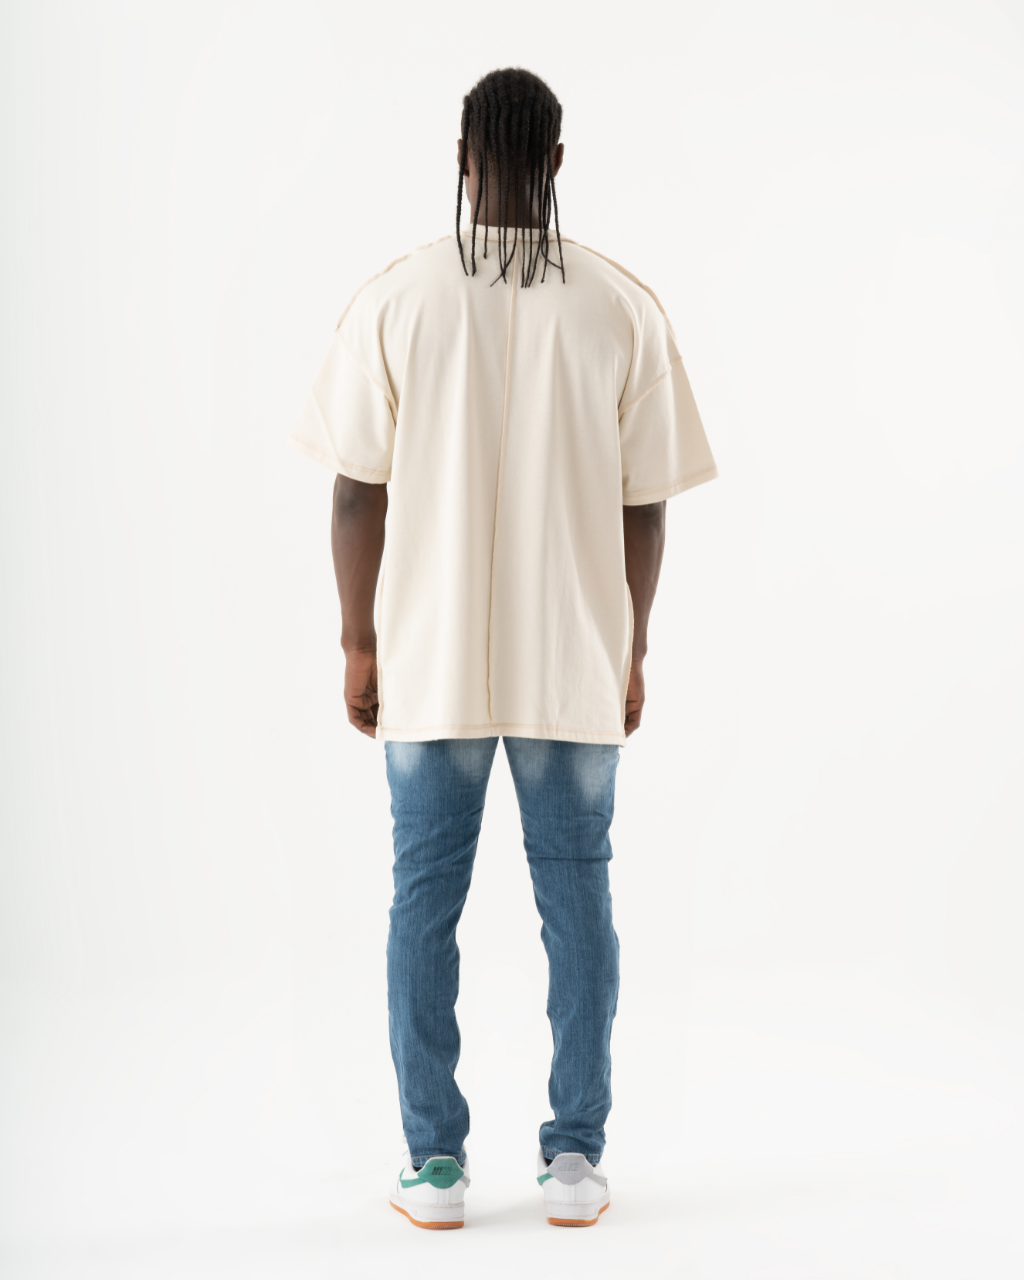 The back view of a man sporting TEZAR jeans and a t-shirt.